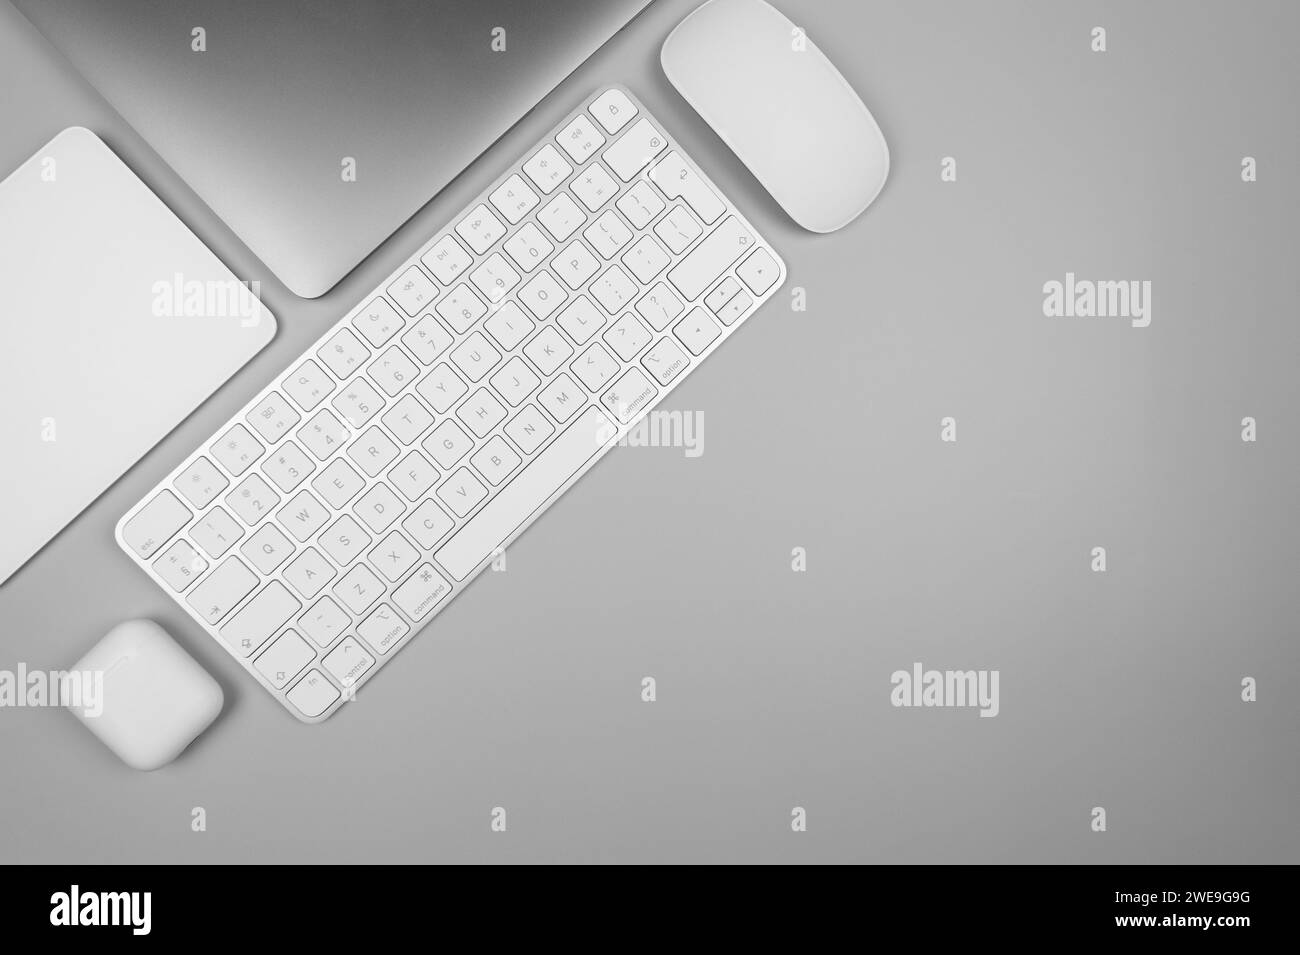 Top view of laptop computer, white keyboard, touchpad, mouse and earphones case on light grey background. Modern office flat lay, copy space. Stock Photo